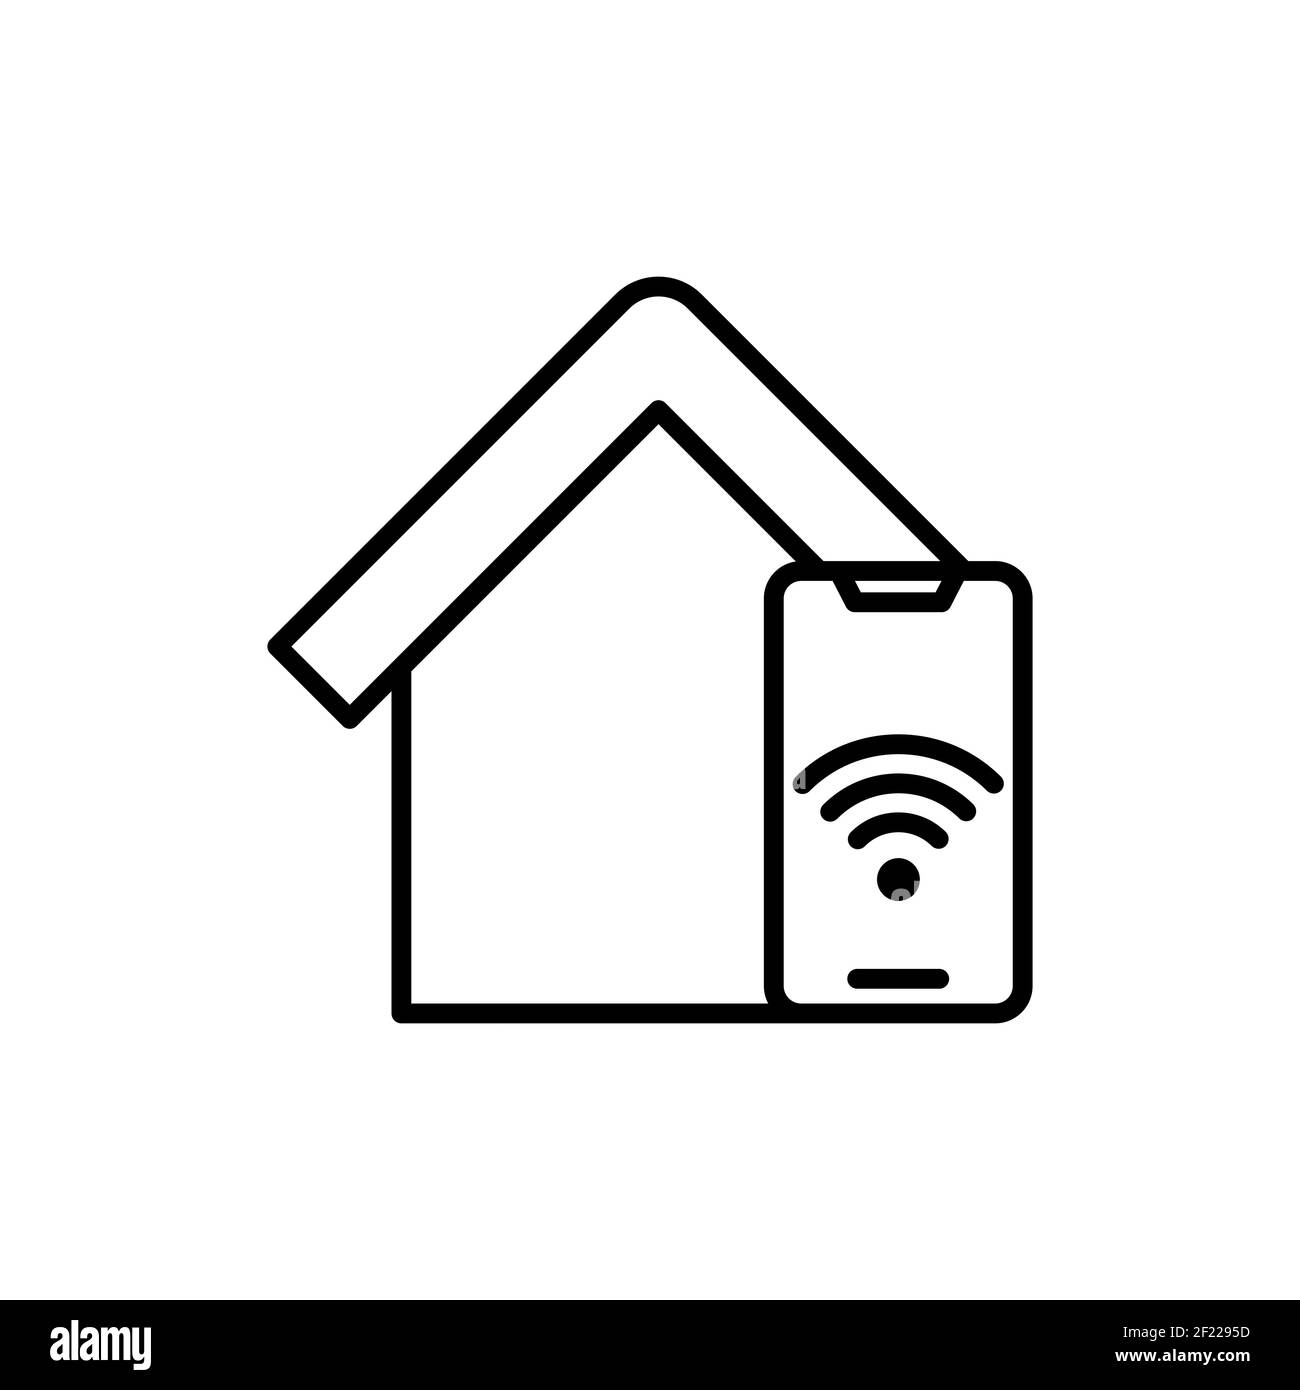 Smart Home Connection Icon Logo Vector design illustration. Smart home logo icon with wireless connection concept. Trendy Smart House vector icon flat Stock Vector